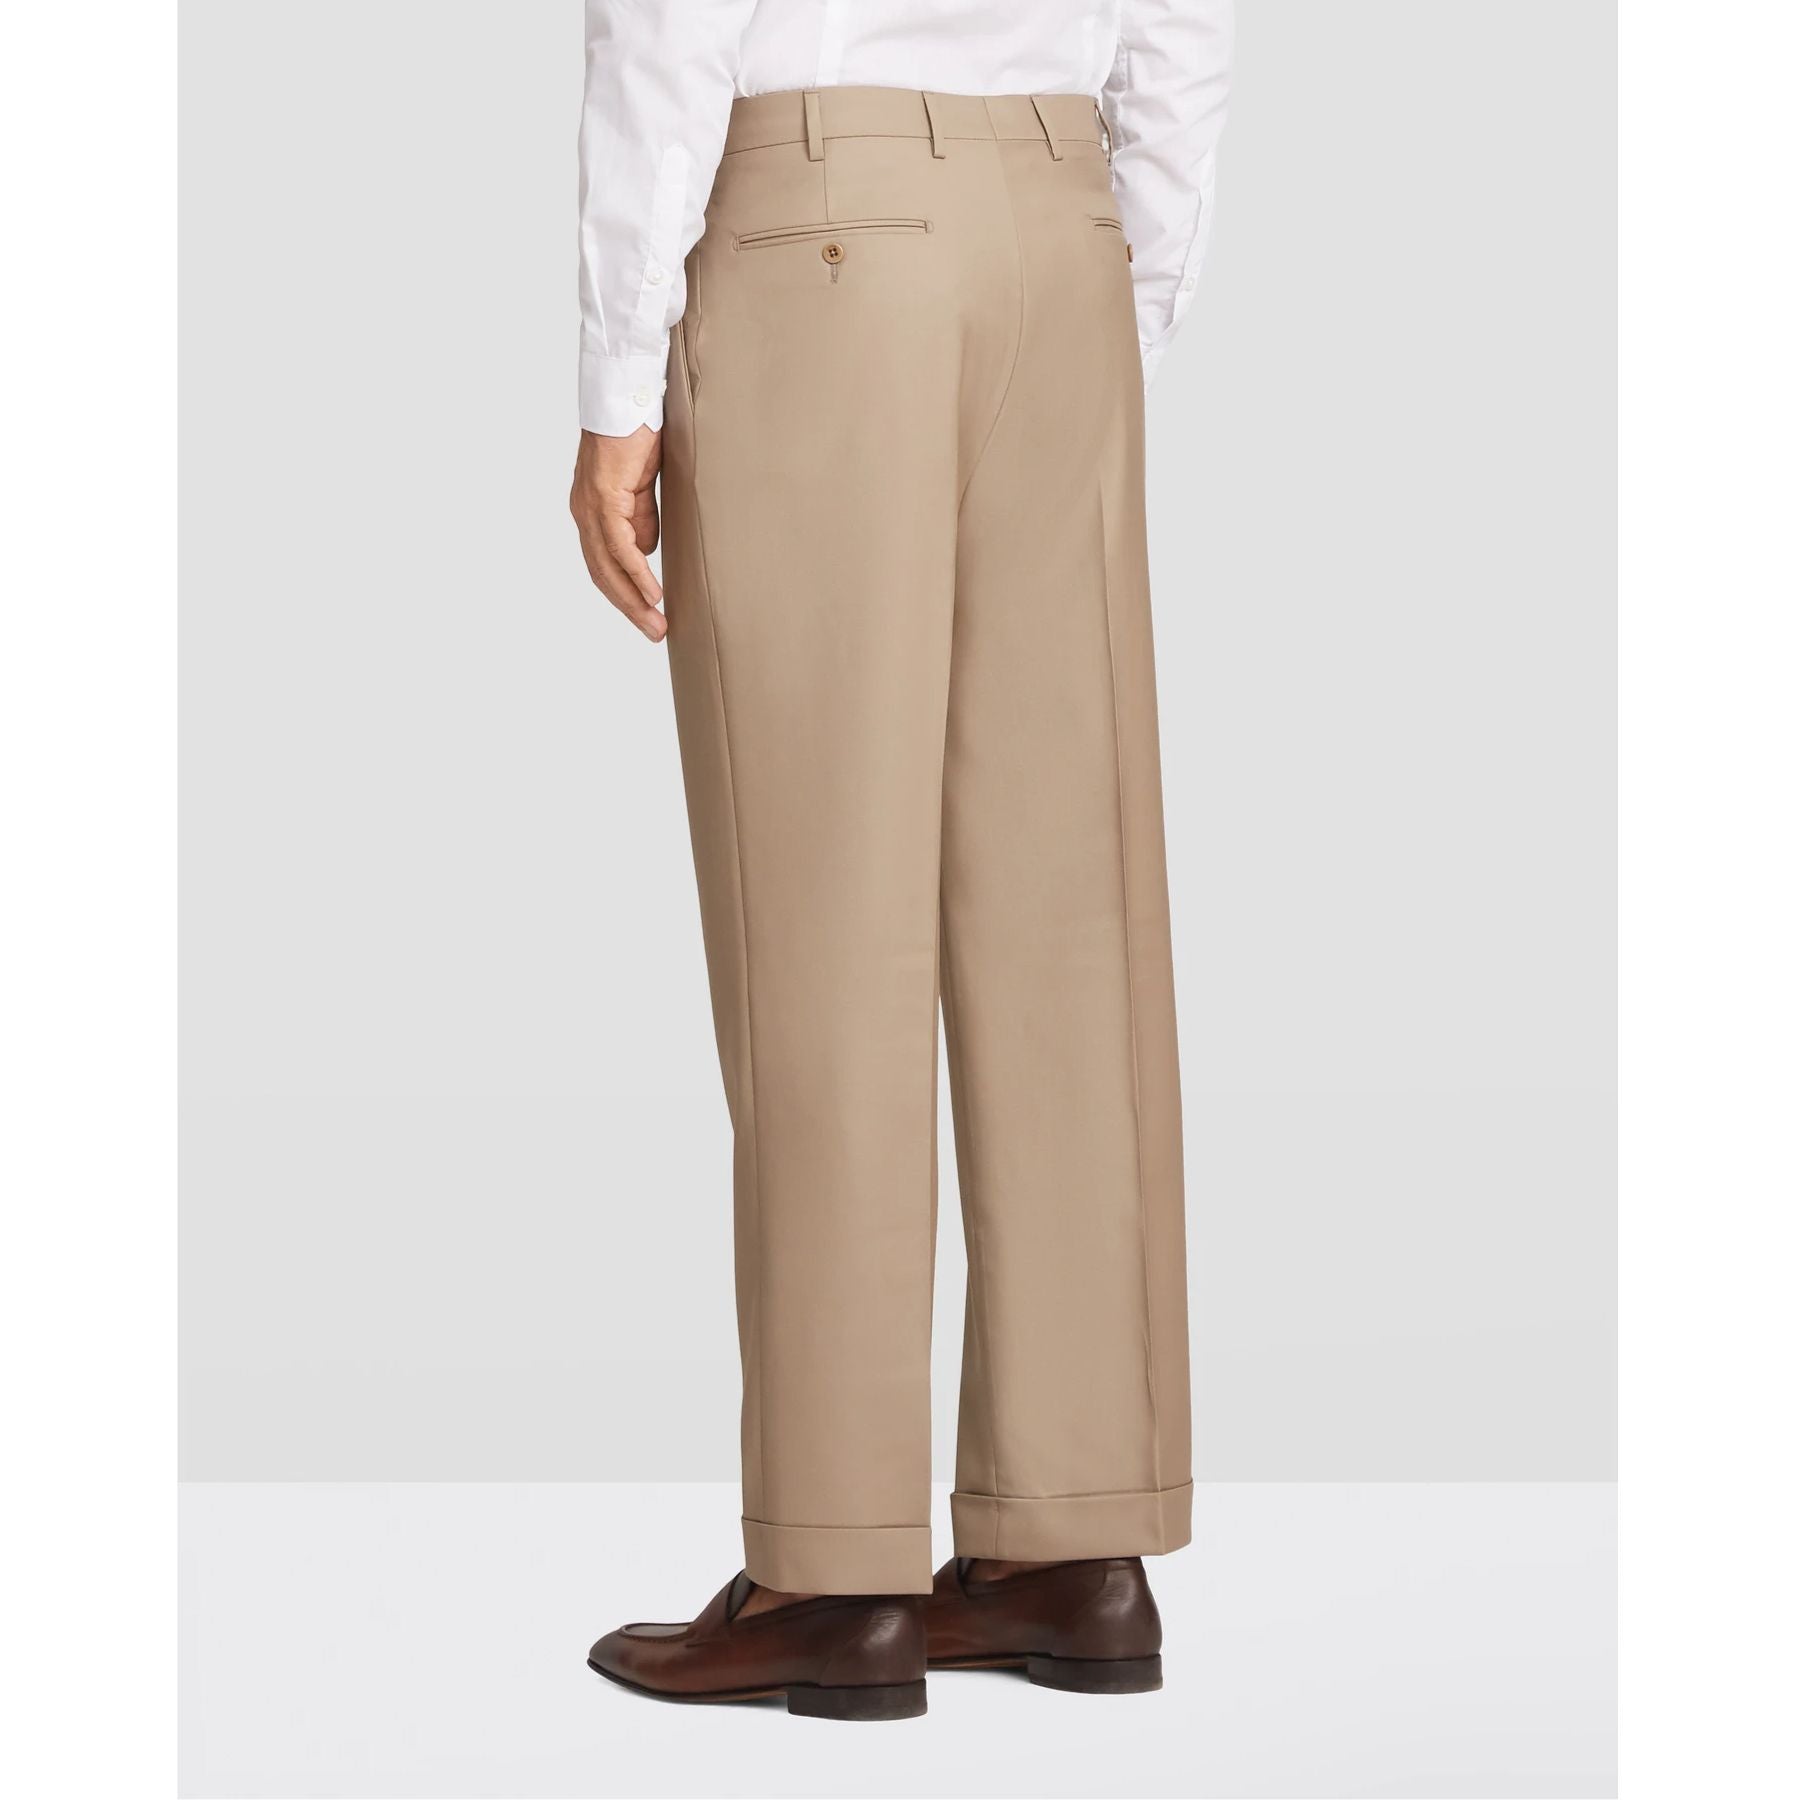 Bennett Double Pleated Super 120s Wool Serge Trouser in Khaki (Sizes 44 and 46) (Full Fit) by Zanella